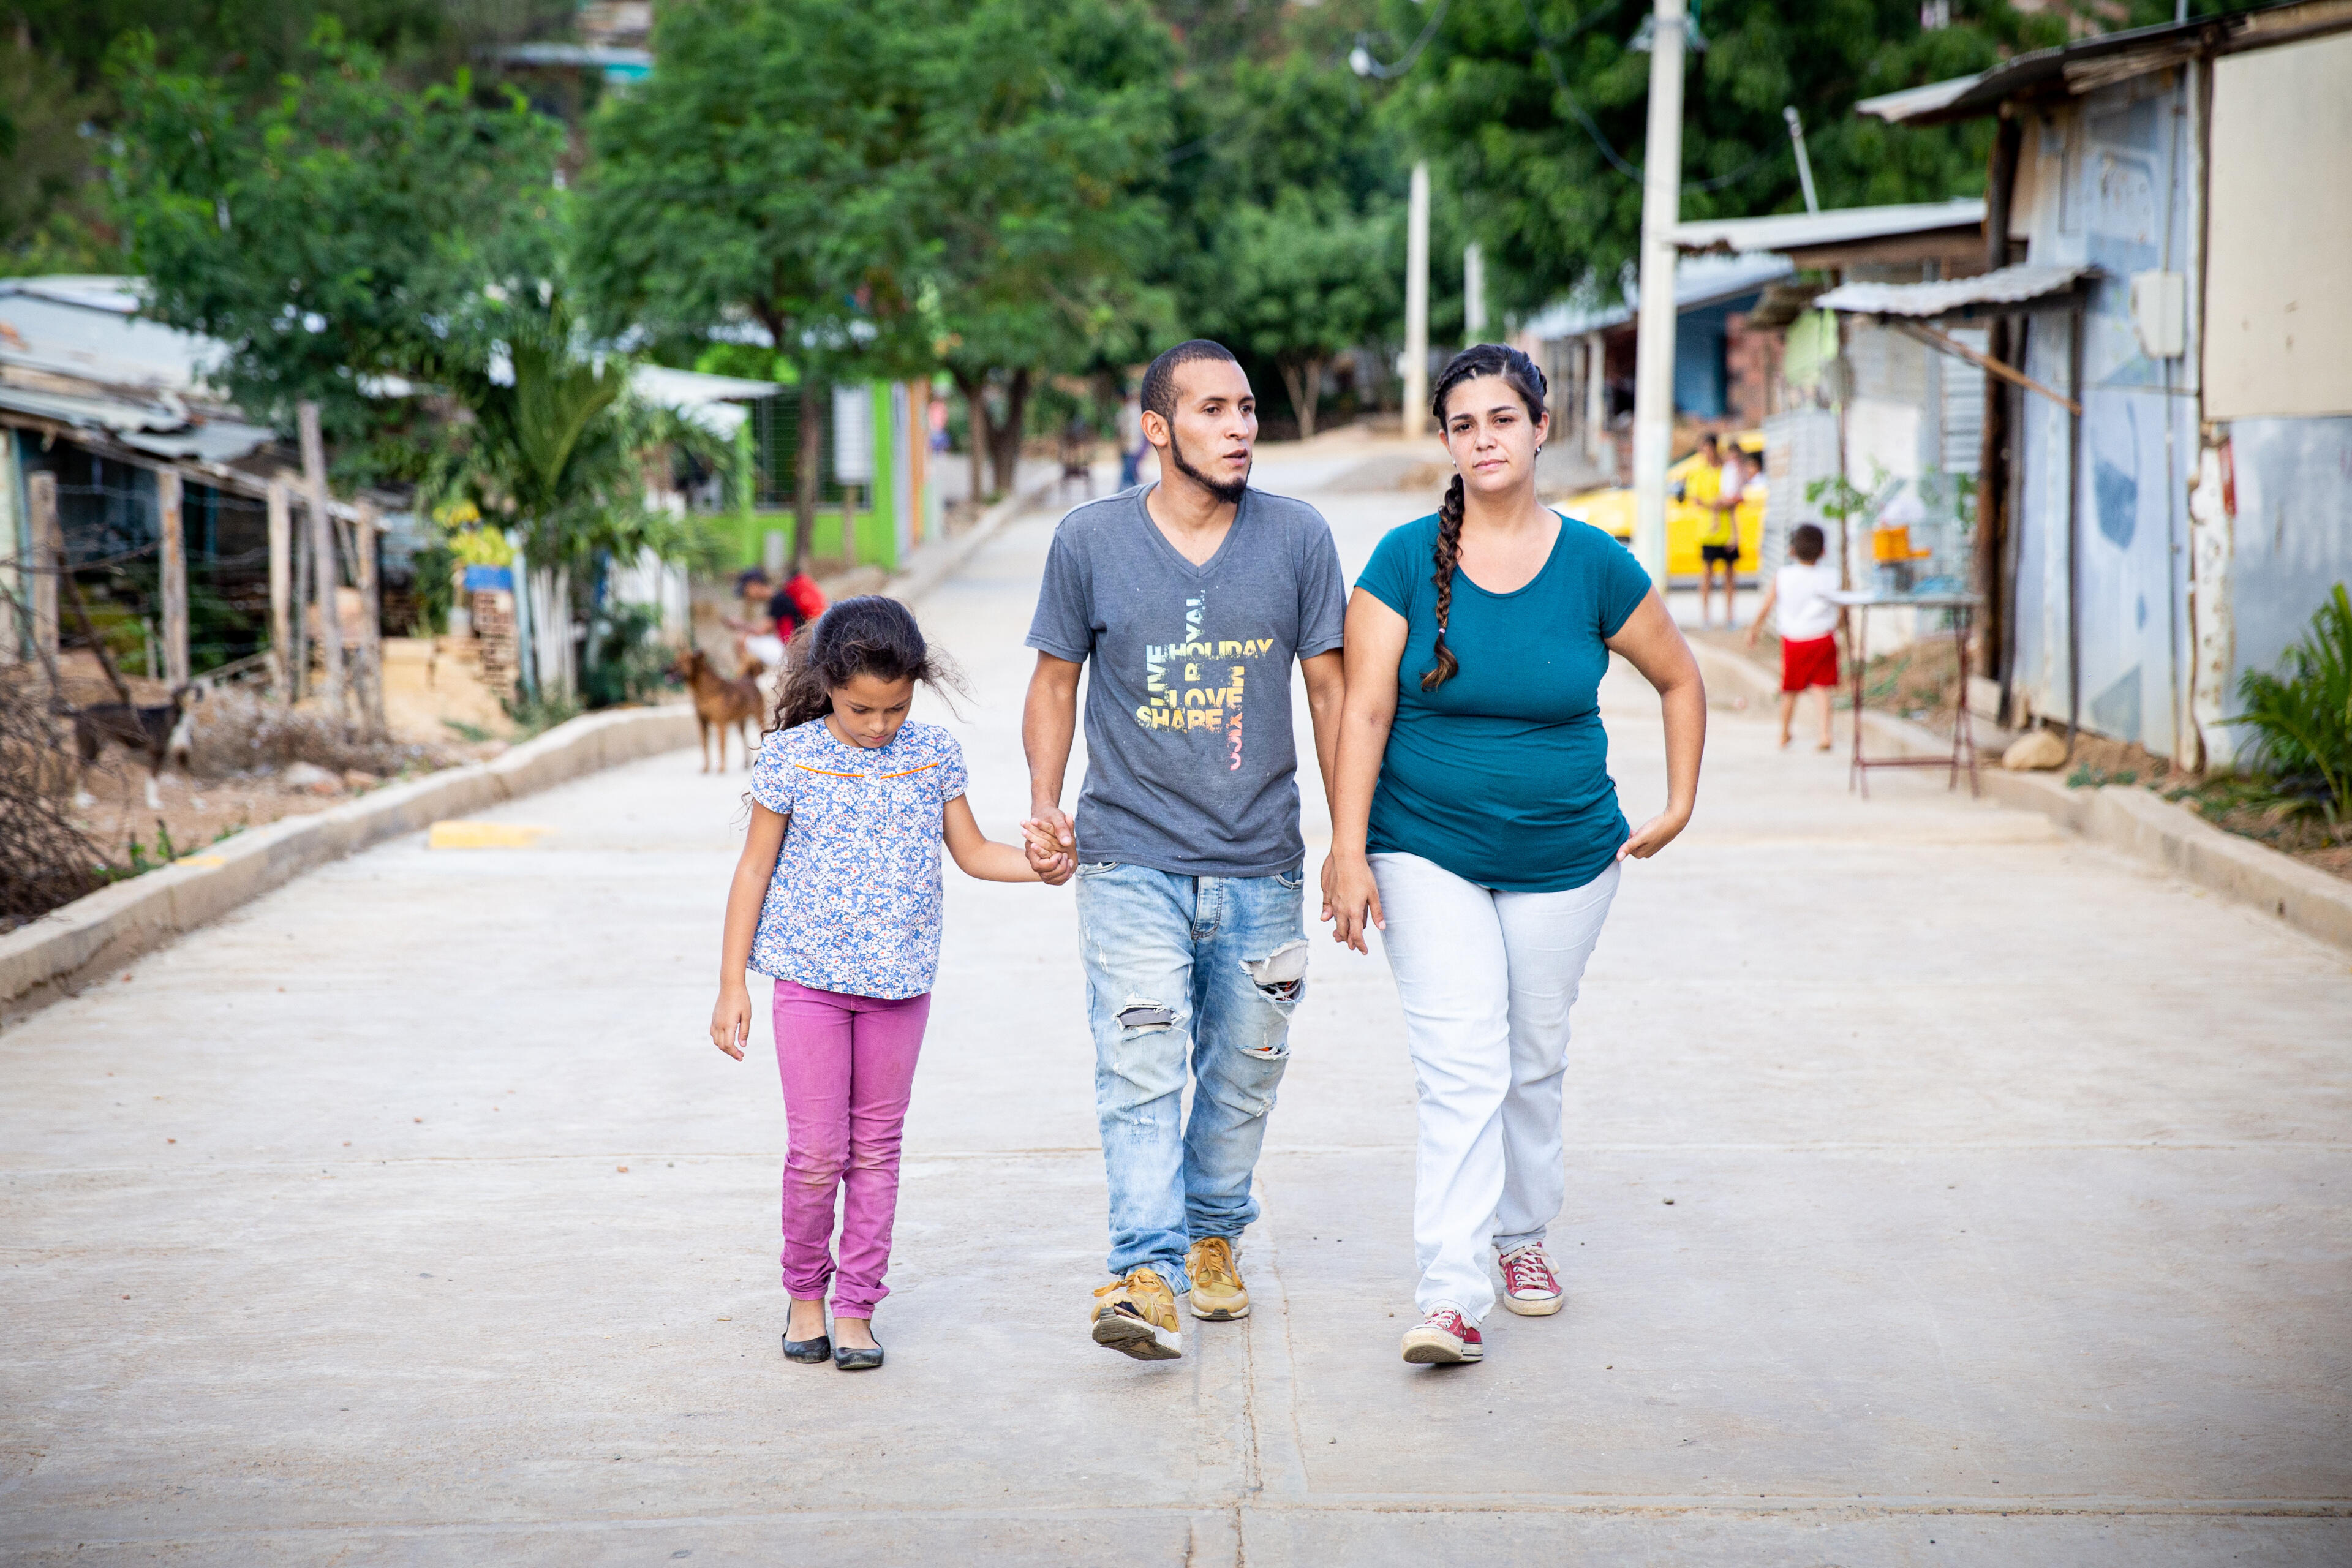 Andrea and her family, who left Venezuela, walk near their new home in Cucuta, Colombia.